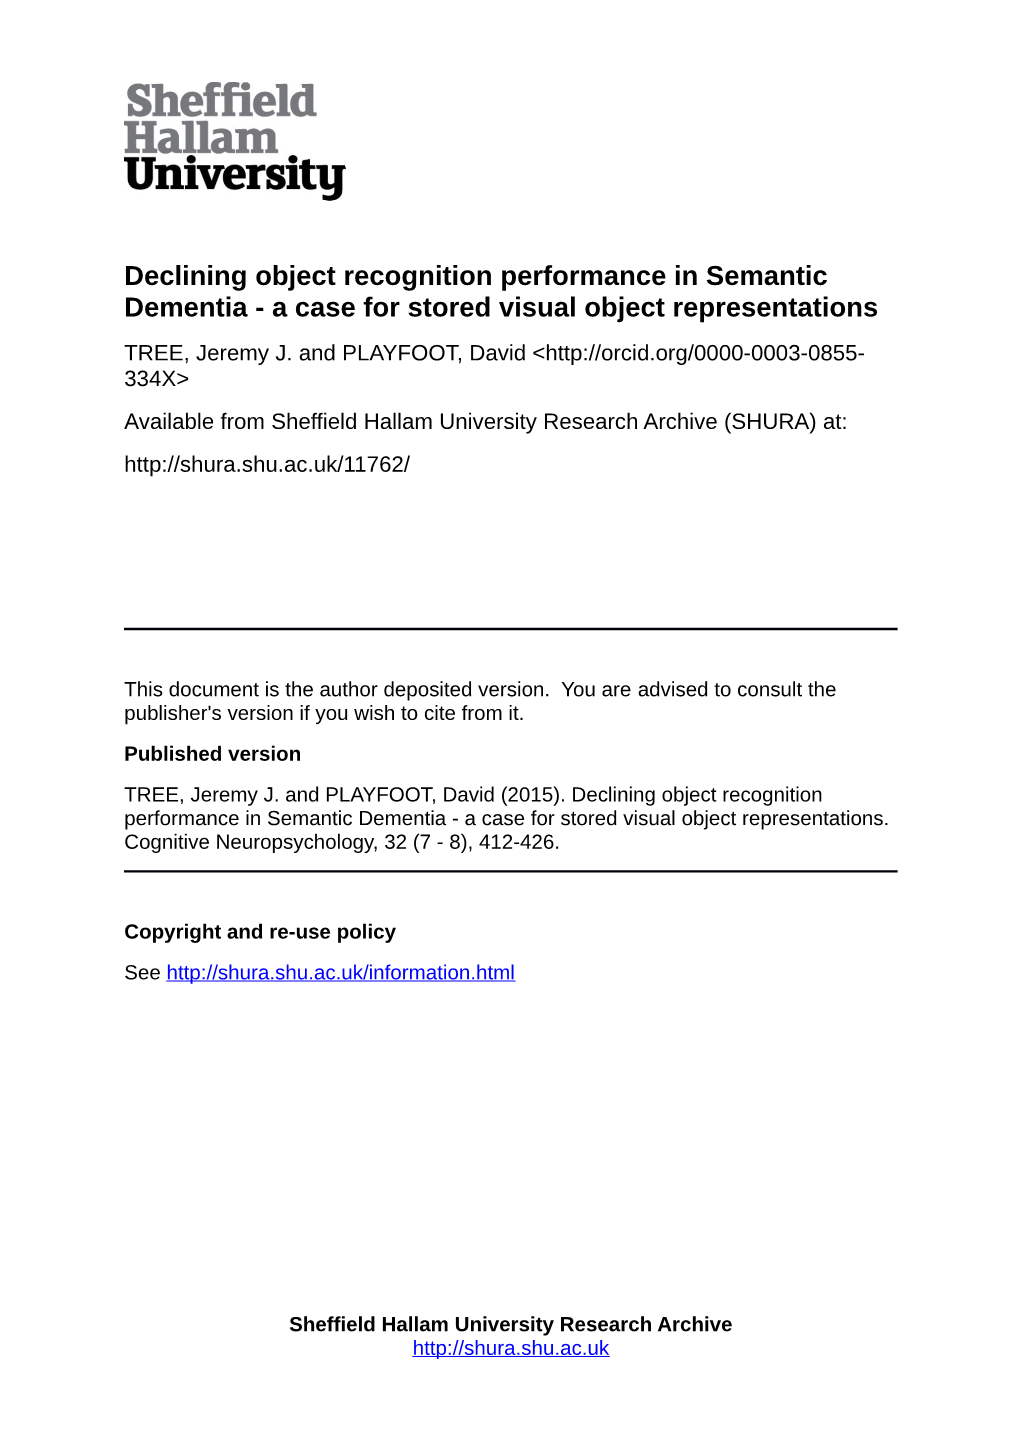 Declining Object Recognition Performance in Semantic Dementia - a Case for Stored Visual Object Representations TREE, Jeremy J